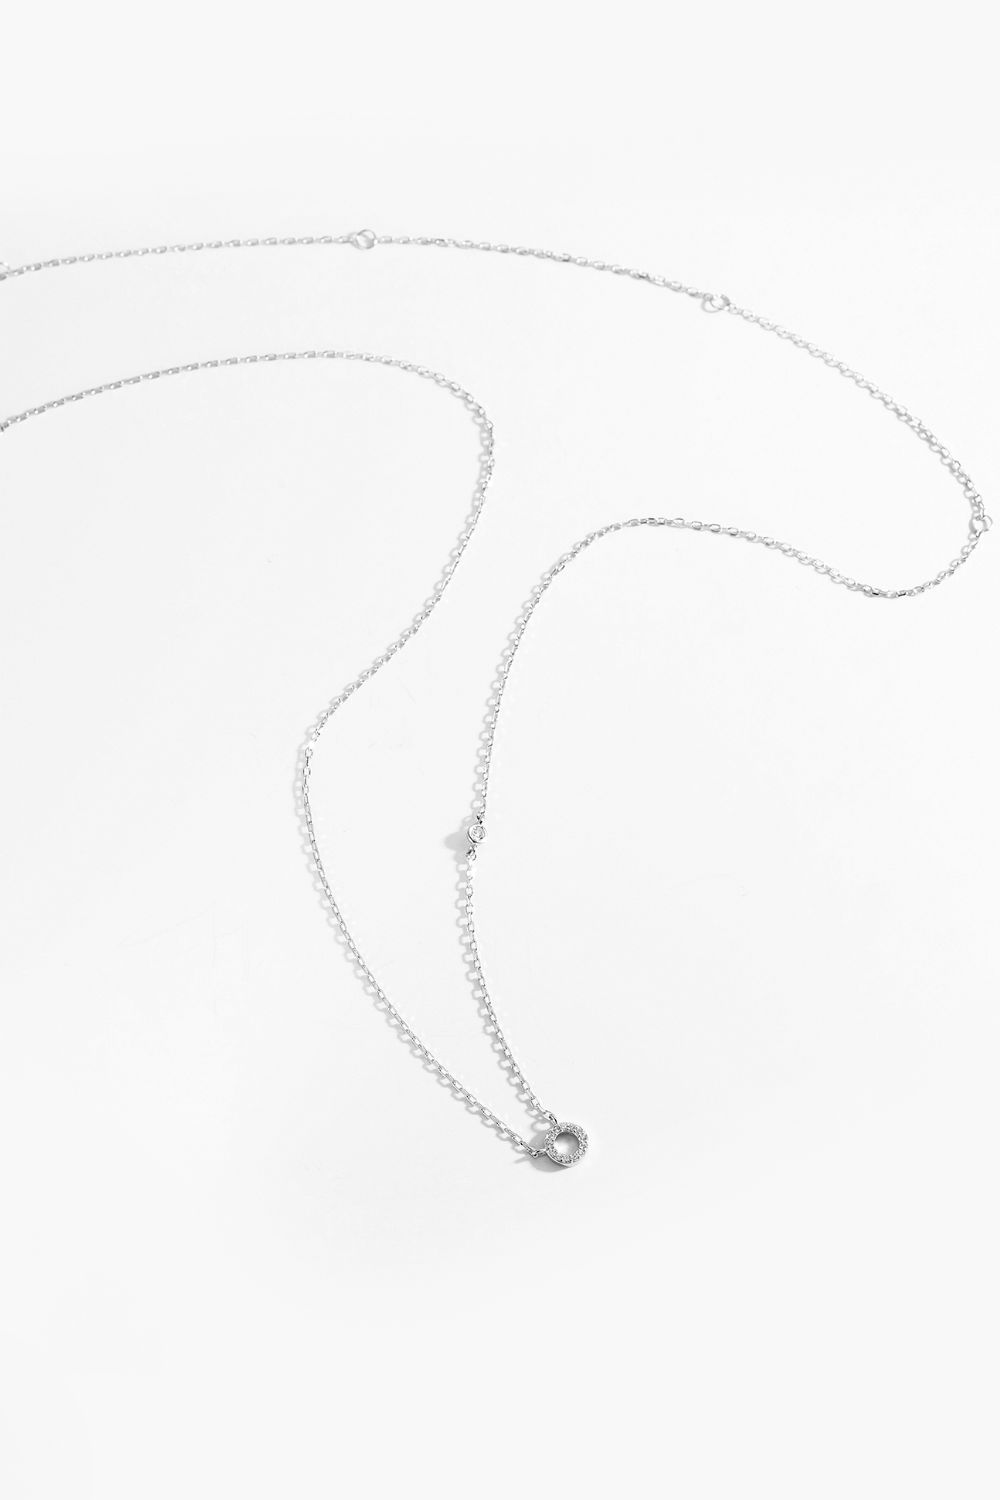 L To P Zircon 925 Sterling Silver Necklace